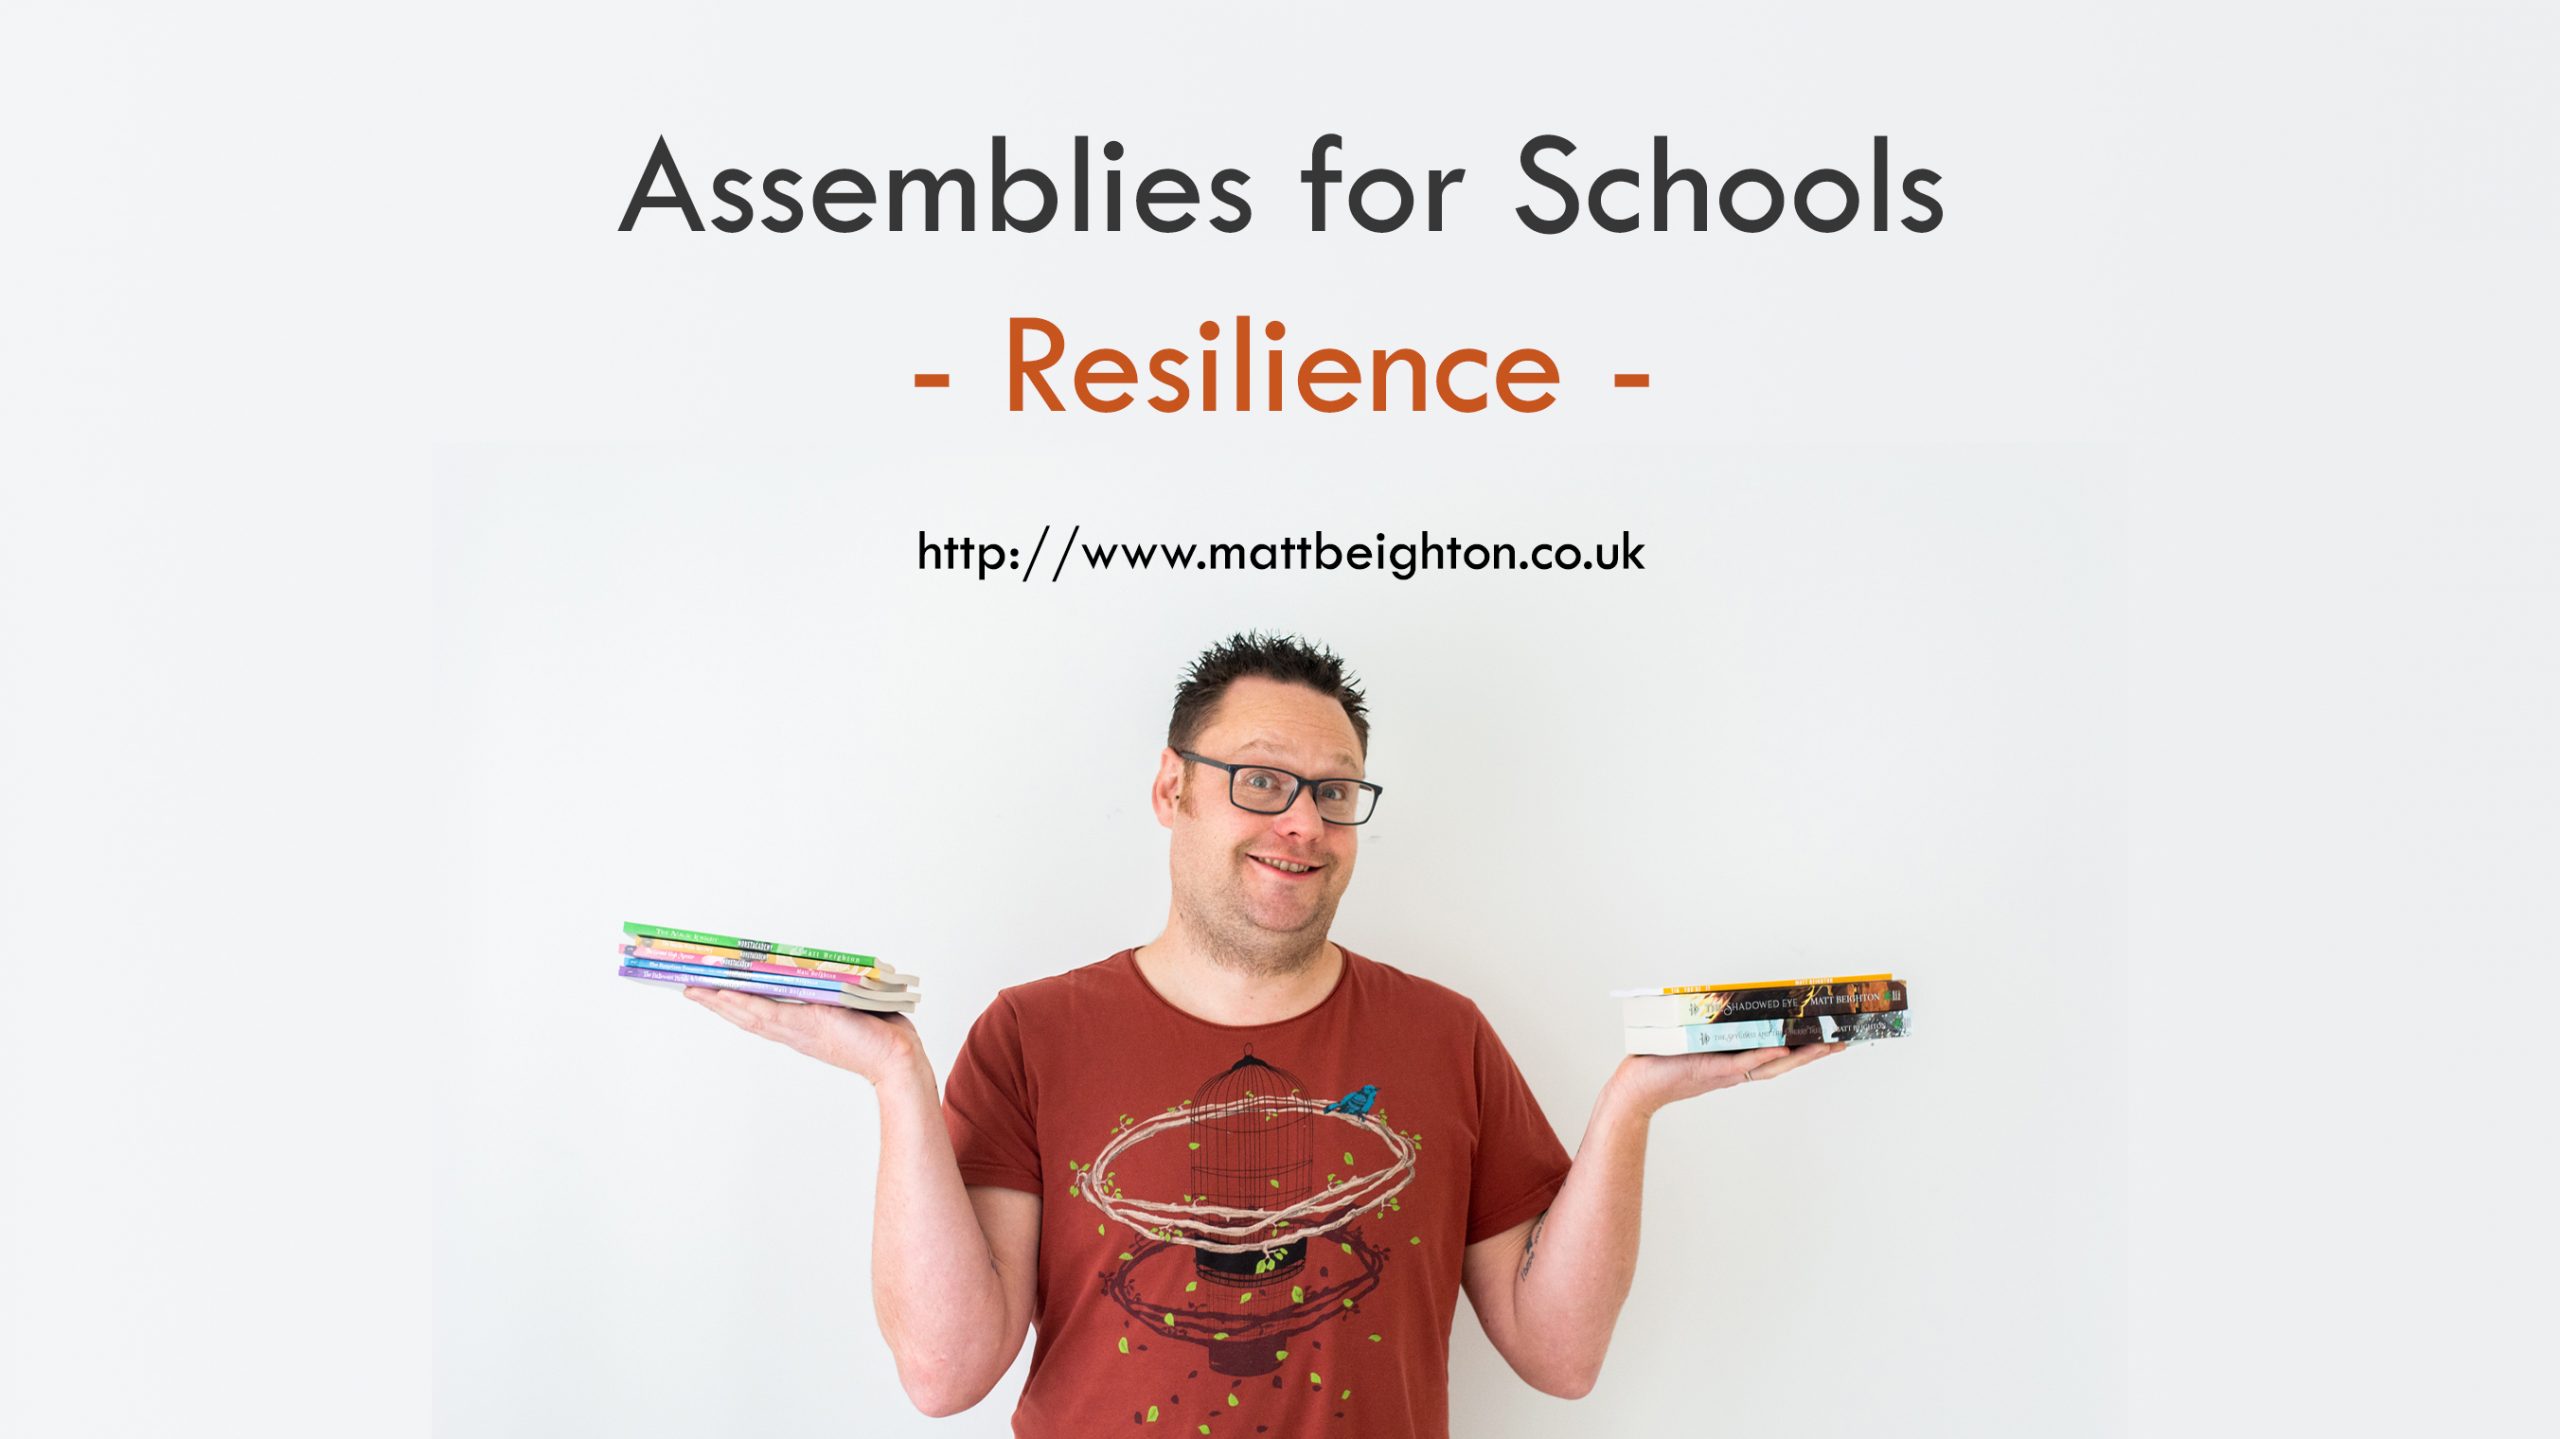 Assemblies for Schools - Resilience